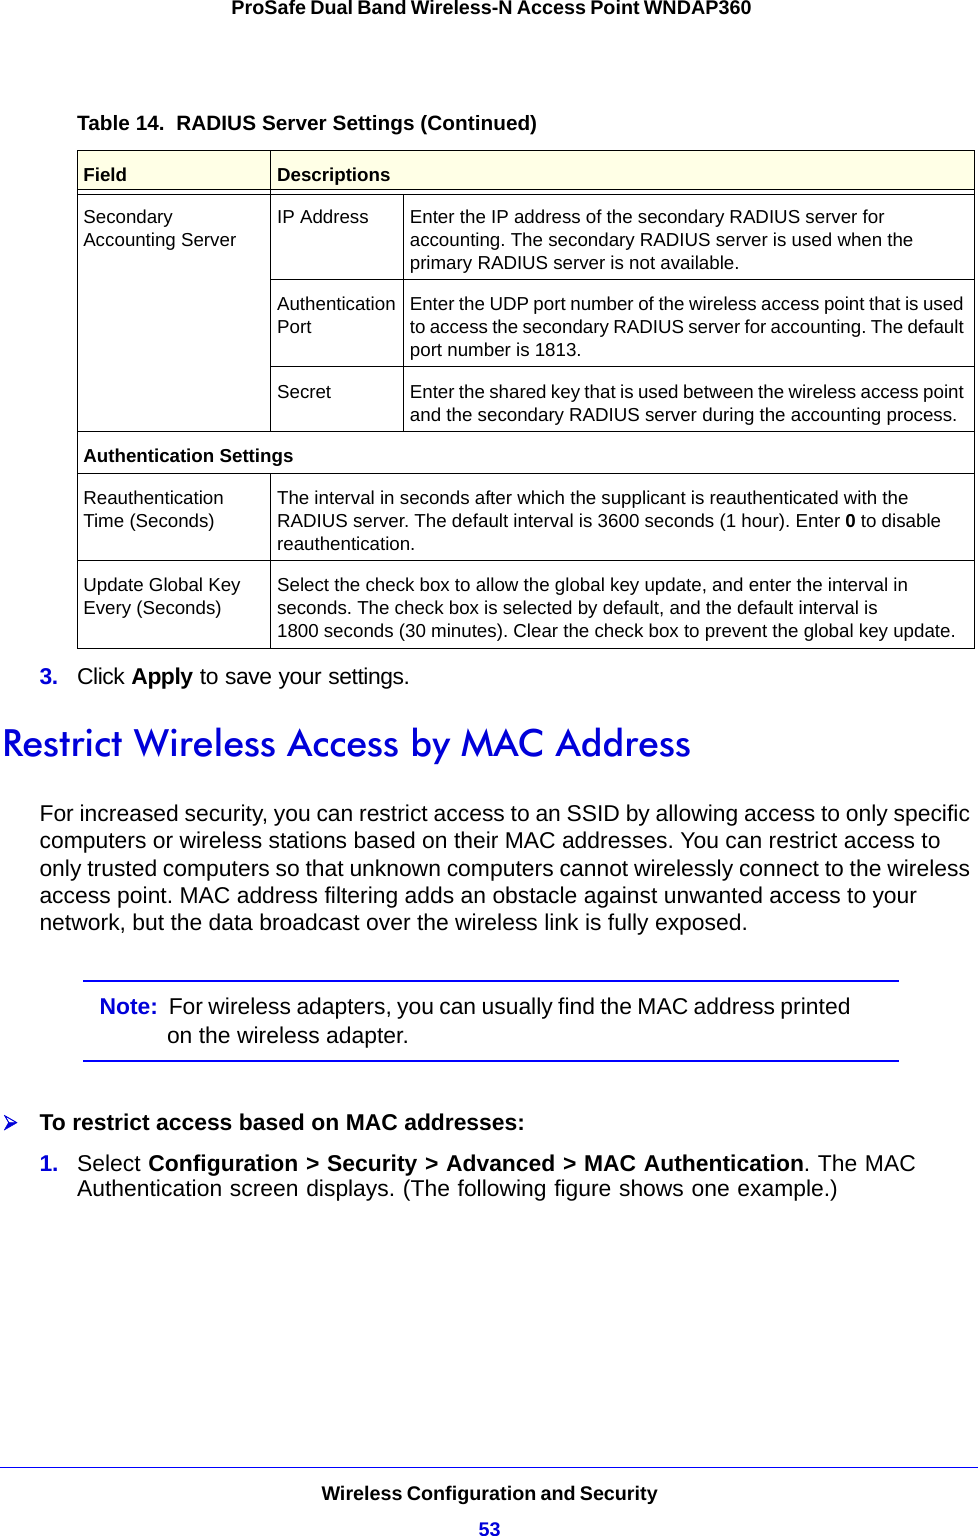 Wireless Configuration and Security53 ProSafe Dual Band Wireless-N Access Point WNDAP3603.  Click Apply to save your settings.Restrict Wireless Access by MAC AddressFor increased security, you can restrict access to an SSID by allowing access to only specific computers or wireless stations based on their MAC addresses. You can restrict access to only trusted computers so that unknown computers cannot wirelessly connect to the wireless access point. MAC address filtering adds an obstacle against unwanted access to your network, but the data broadcast over the wireless link is fully exposed.Note:  For wireless adapters, you can usually find the MAC address printed on the wireless adapter.To restrict access based on MAC addresses:1.  Select Configuration &gt; Security &gt; Advanced &gt; MAC Authentication. The MAC Authentication screen displays. (The following figure shows one example.)Secondary Accounting ServerIP Address Enter the IP address of the secondary RADIUS server for accounting. The secondary RADIUS server is used when the primary RADIUS server is not available.Authentication PortEnter the UDP port number of the wireless access point that is used to access the secondary RADIUS server for accounting. The default port number is 1813. Secret Enter the shared key that is used between the wireless access point and the secondary RADIUS server during the accounting process.Authentication SettingsReauthentication Time (Seconds)The interval in seconds after which the supplicant is reauthenticated with the RADIUS server. The default interval is 3600 seconds (1 hour). Enter 0 to disable reauthentication.Update Global Key Every (Seconds)Select the check box to allow the global key update, and enter the interval in seconds. The check box is selected by default, and the default interval is 1800 seconds (30 minutes). Clear the check box to prevent the global key update.Table 14.  RADIUS Server Settings (Continued)Field Descriptions